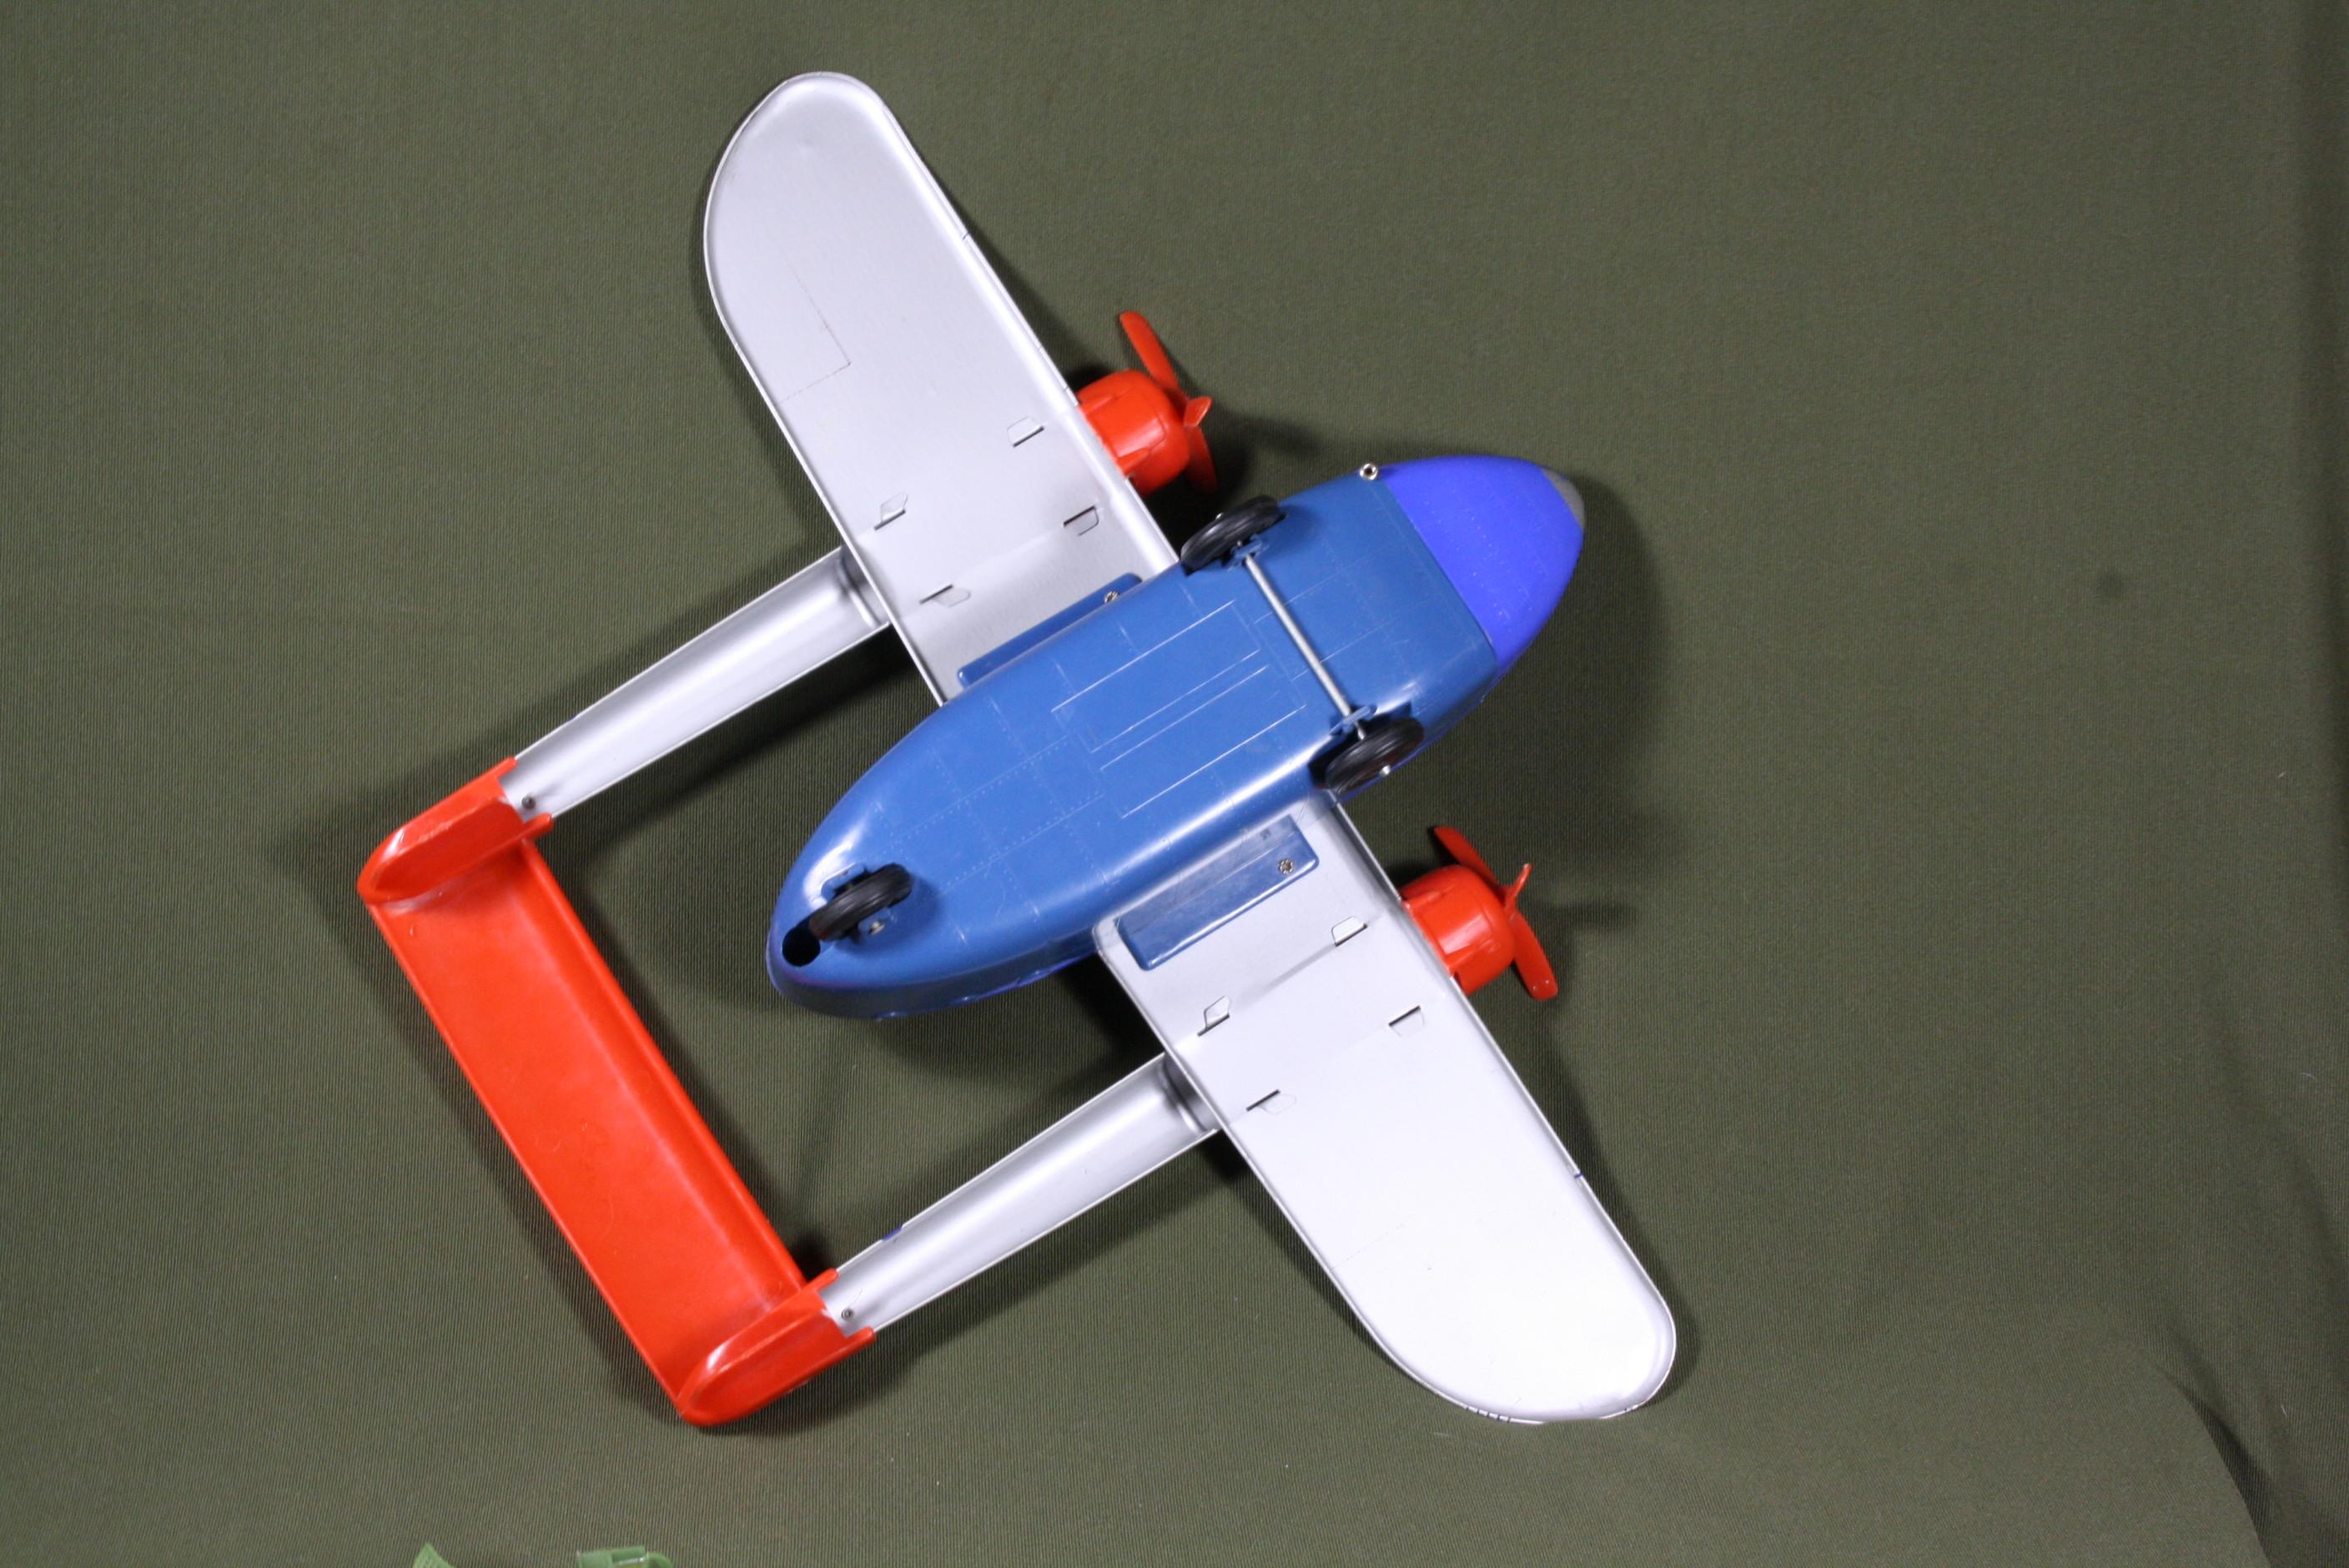 1957 Ideal Toy Co. “C-184 Globemaster”plane/accessories.